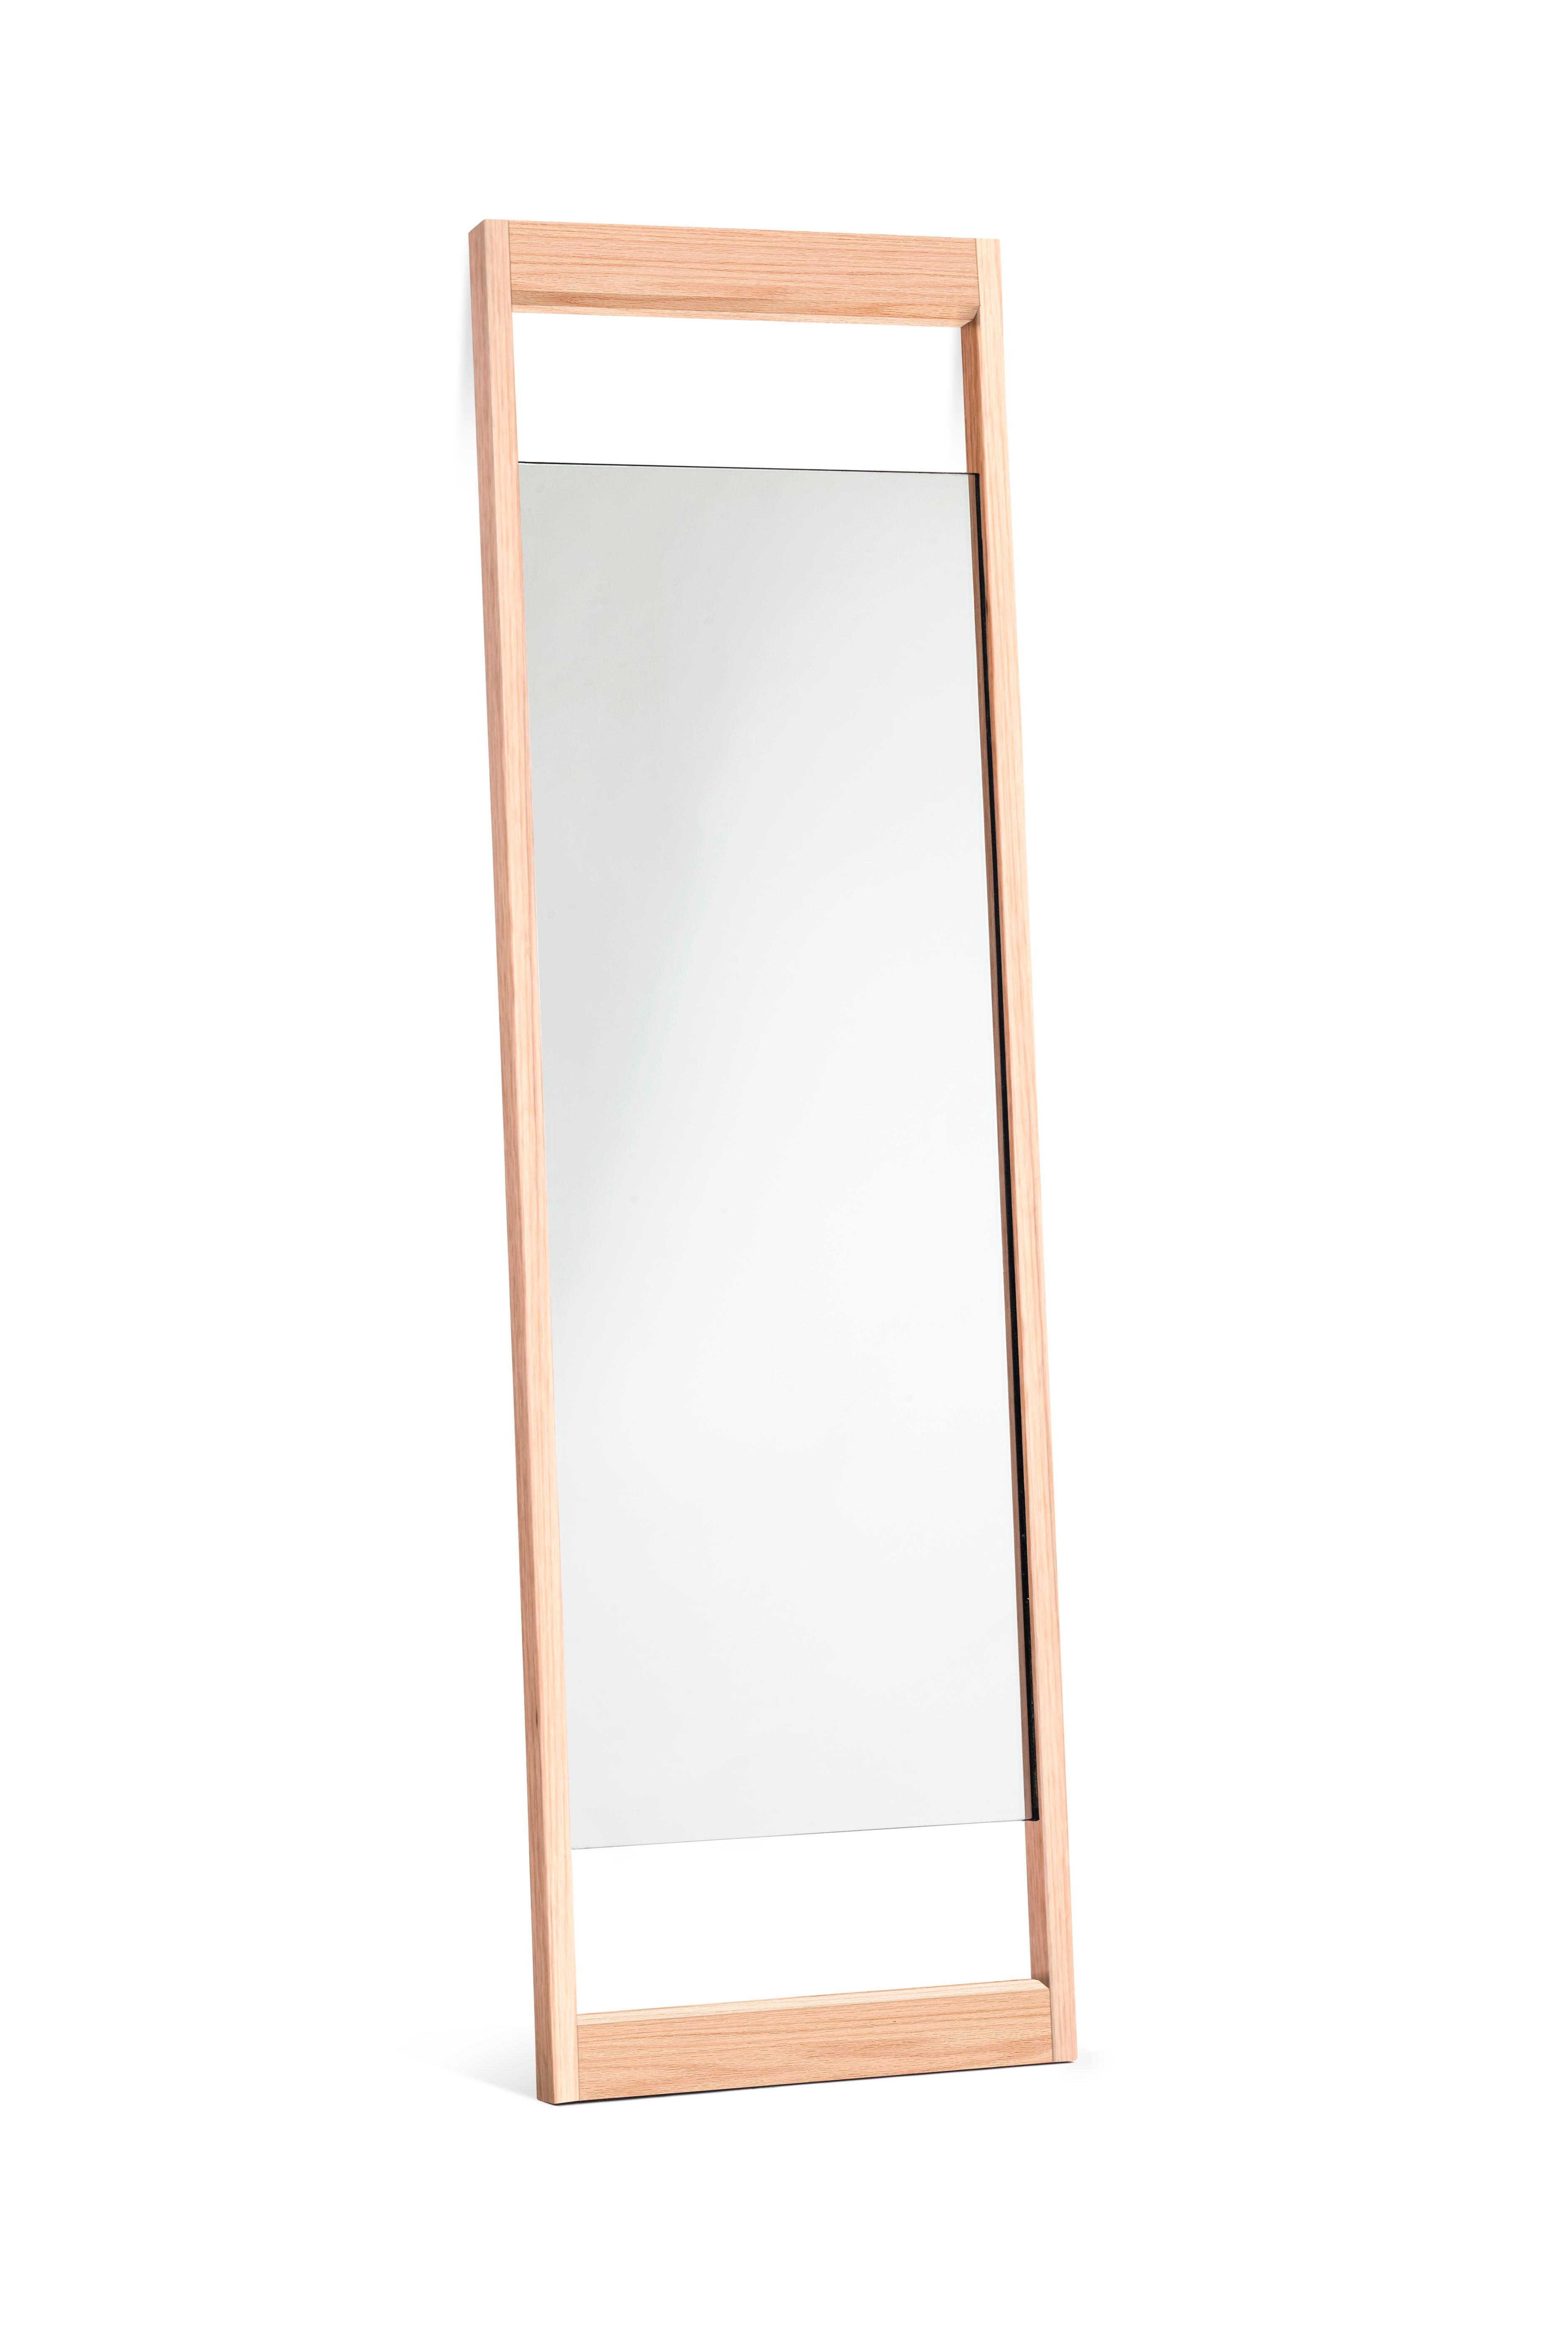 Introducing the Espejo DEDO, a Mexican Contemporary Wall Mirror designed by Emiliano Molina for CUCHARA. This mirror features a simple yet elegant construction, aiming to seamlessly blend with spaces and enhance their sense of openness and